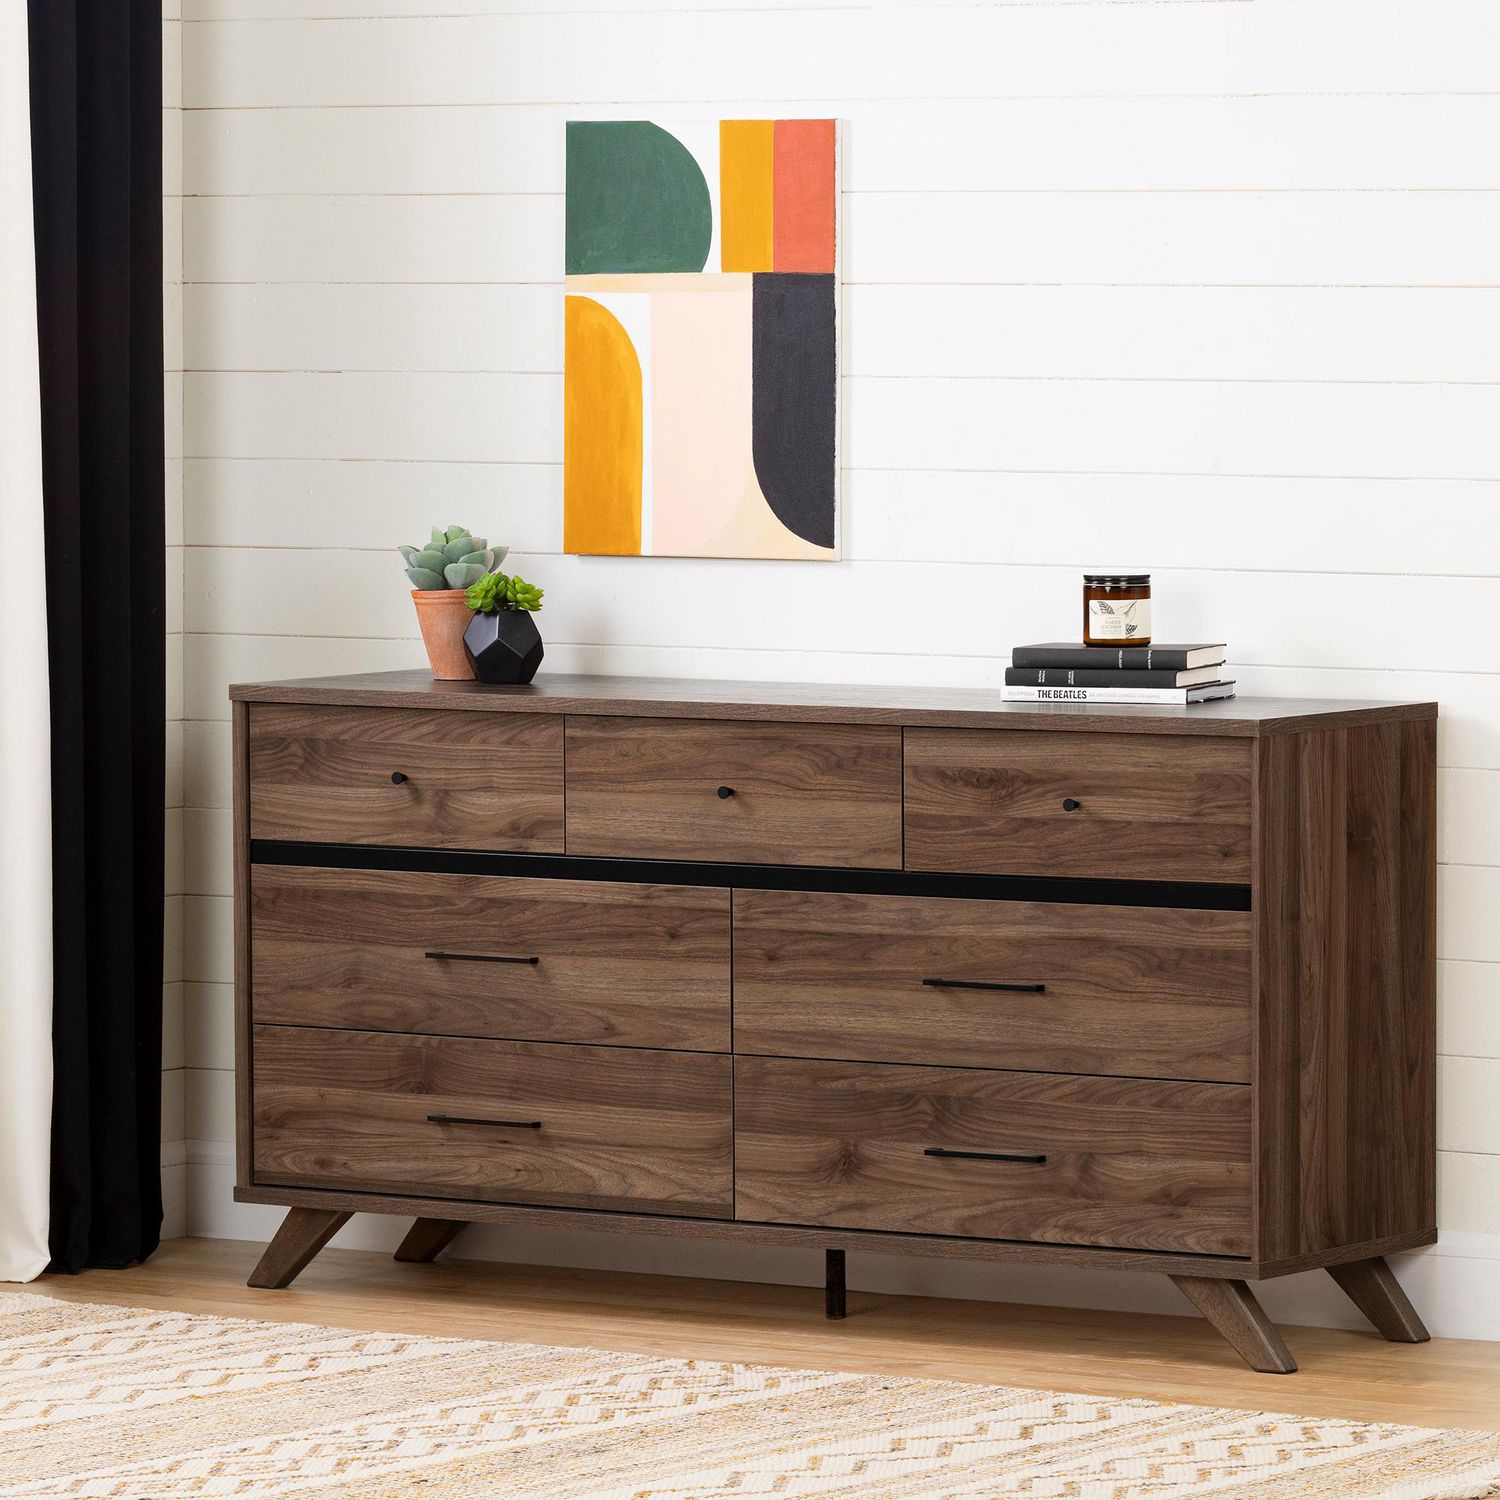 South Shore Flam 7 Drawer Double Dresser Natural Walnut And Matte